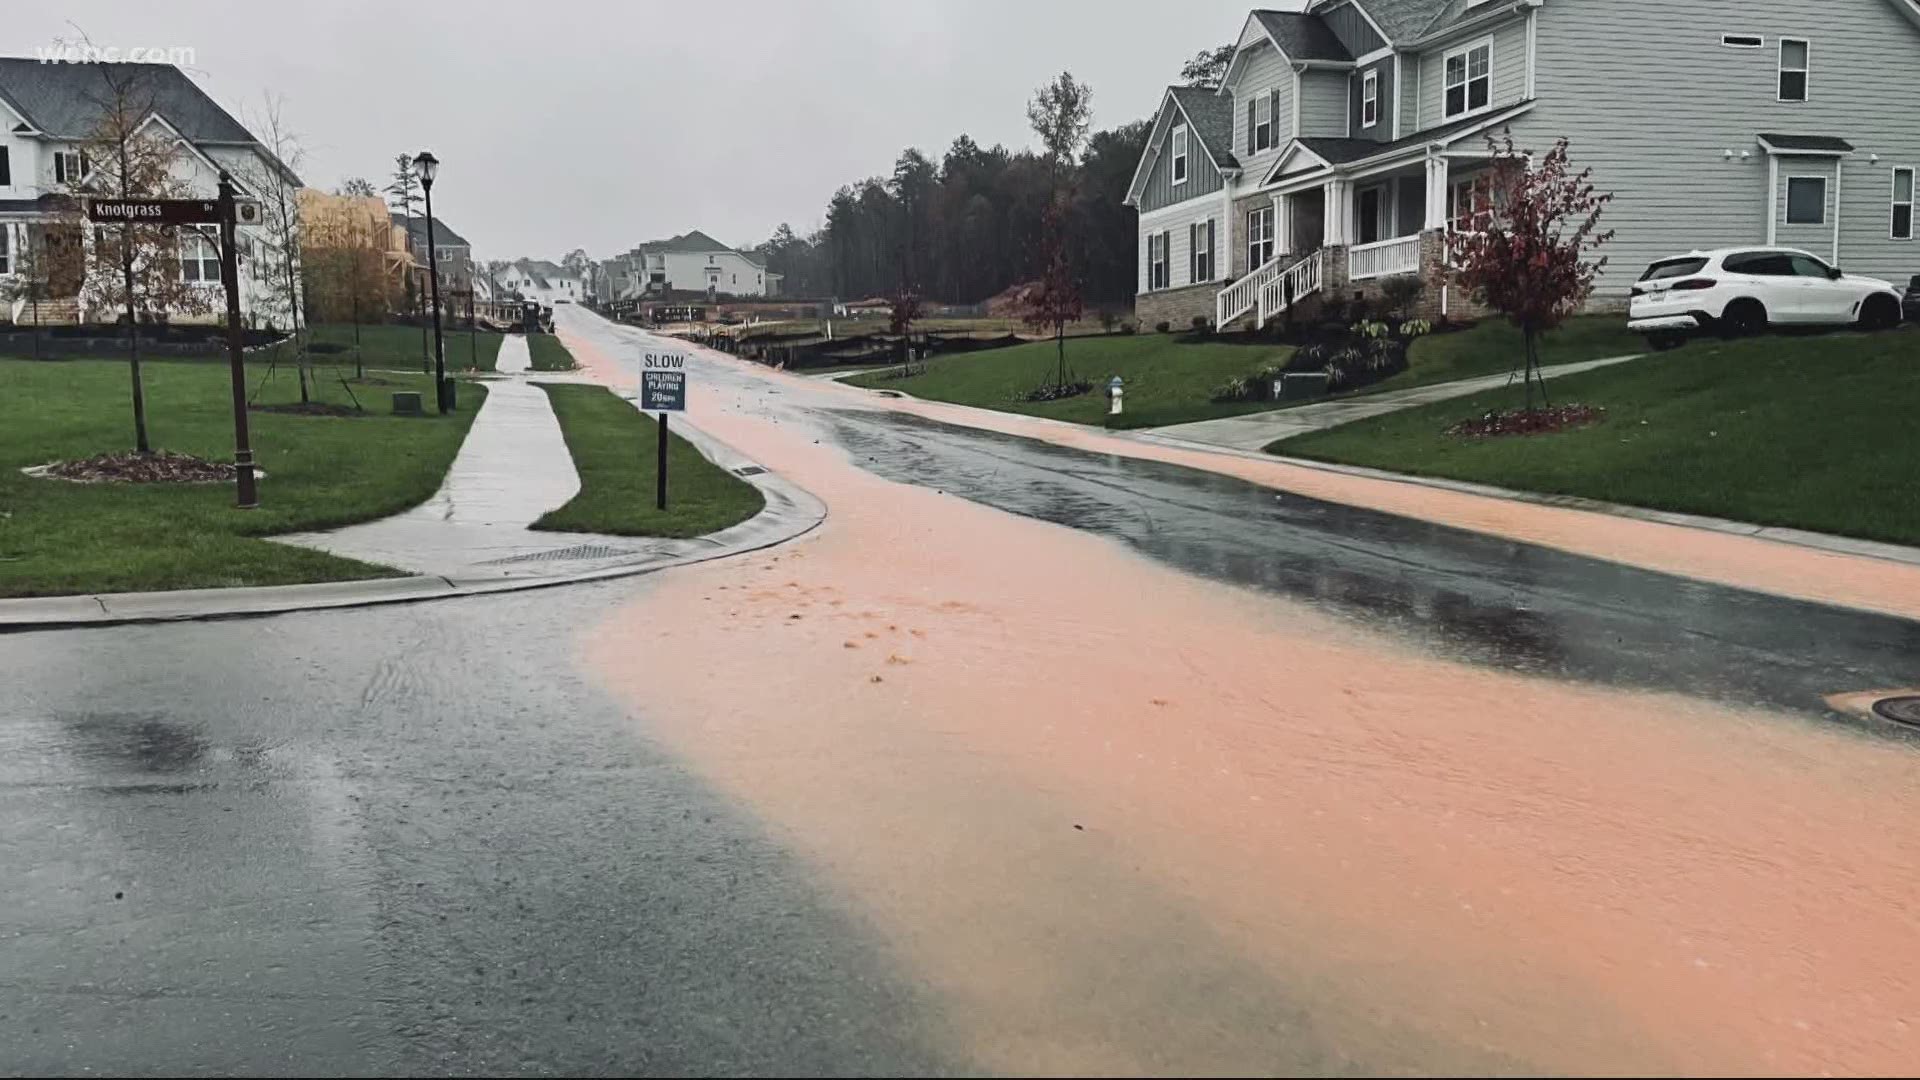 Neighbors in a Fort Mill neighborhood say they are tired of the flooding when it rain, and they are blaming the builder for improper drainage.